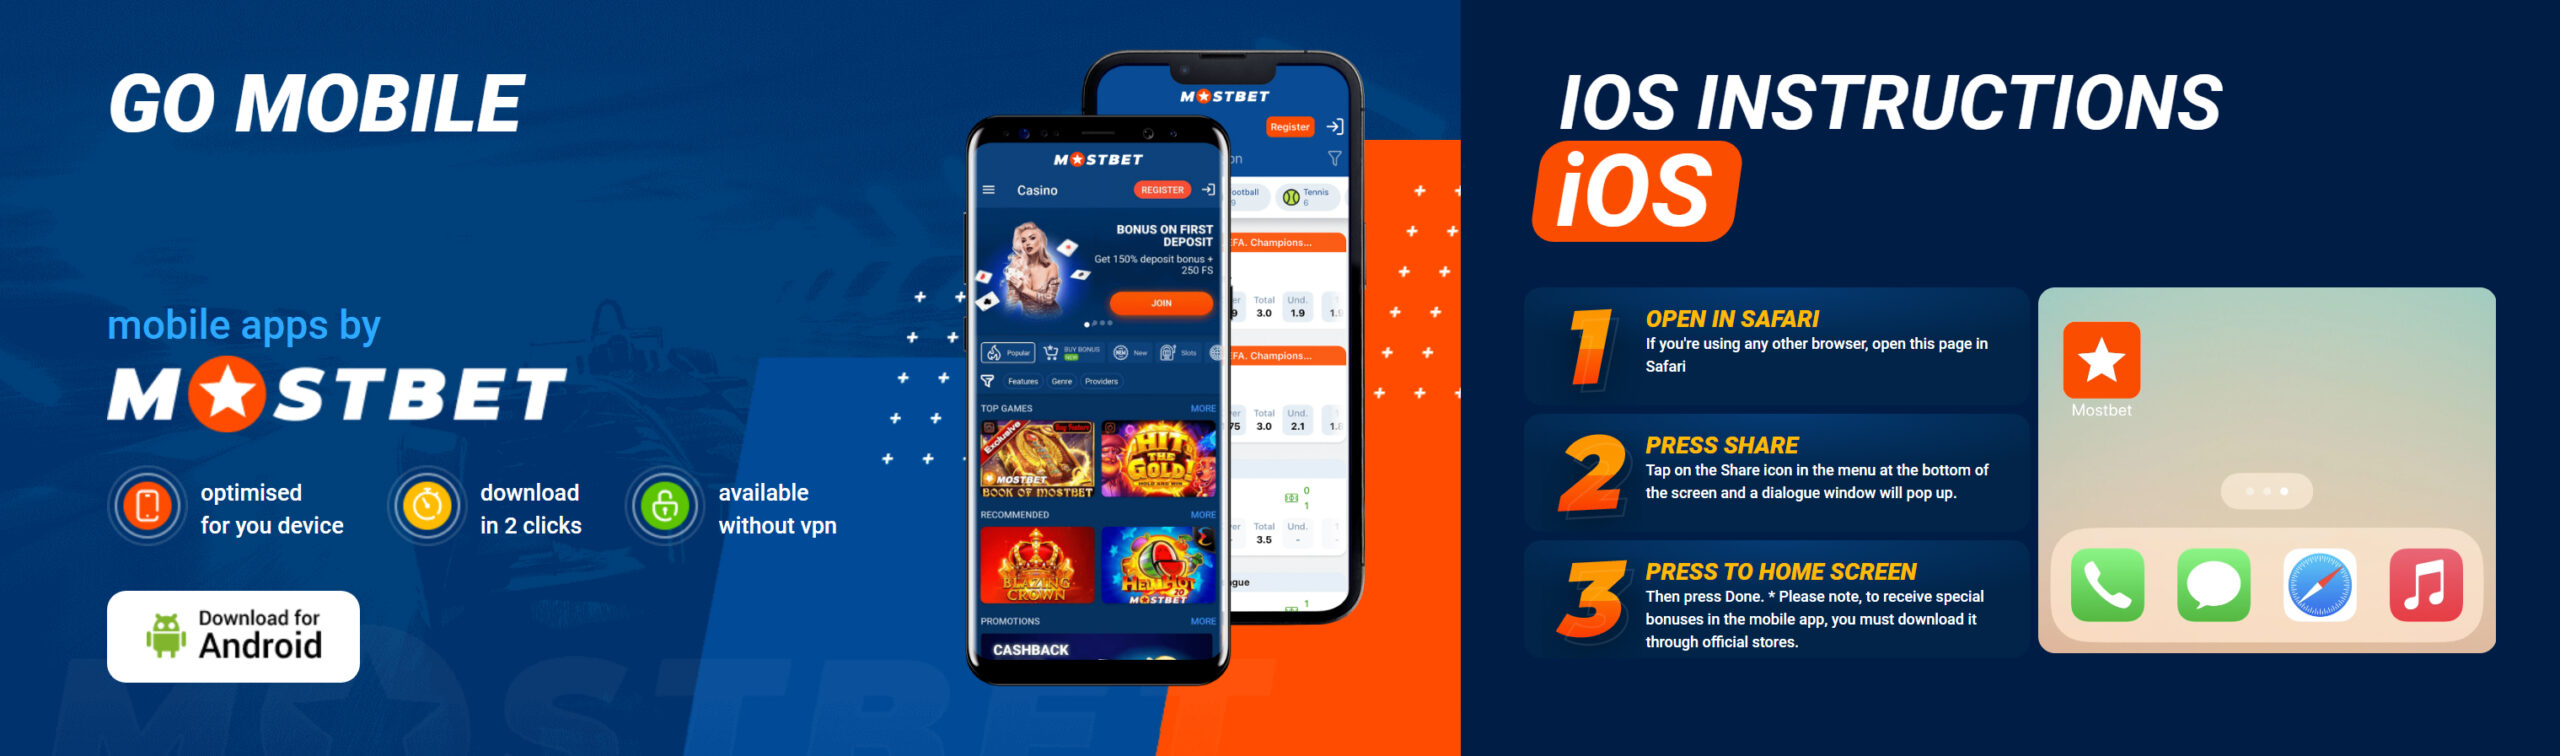 Mobile application Mostbet for Android and iOS